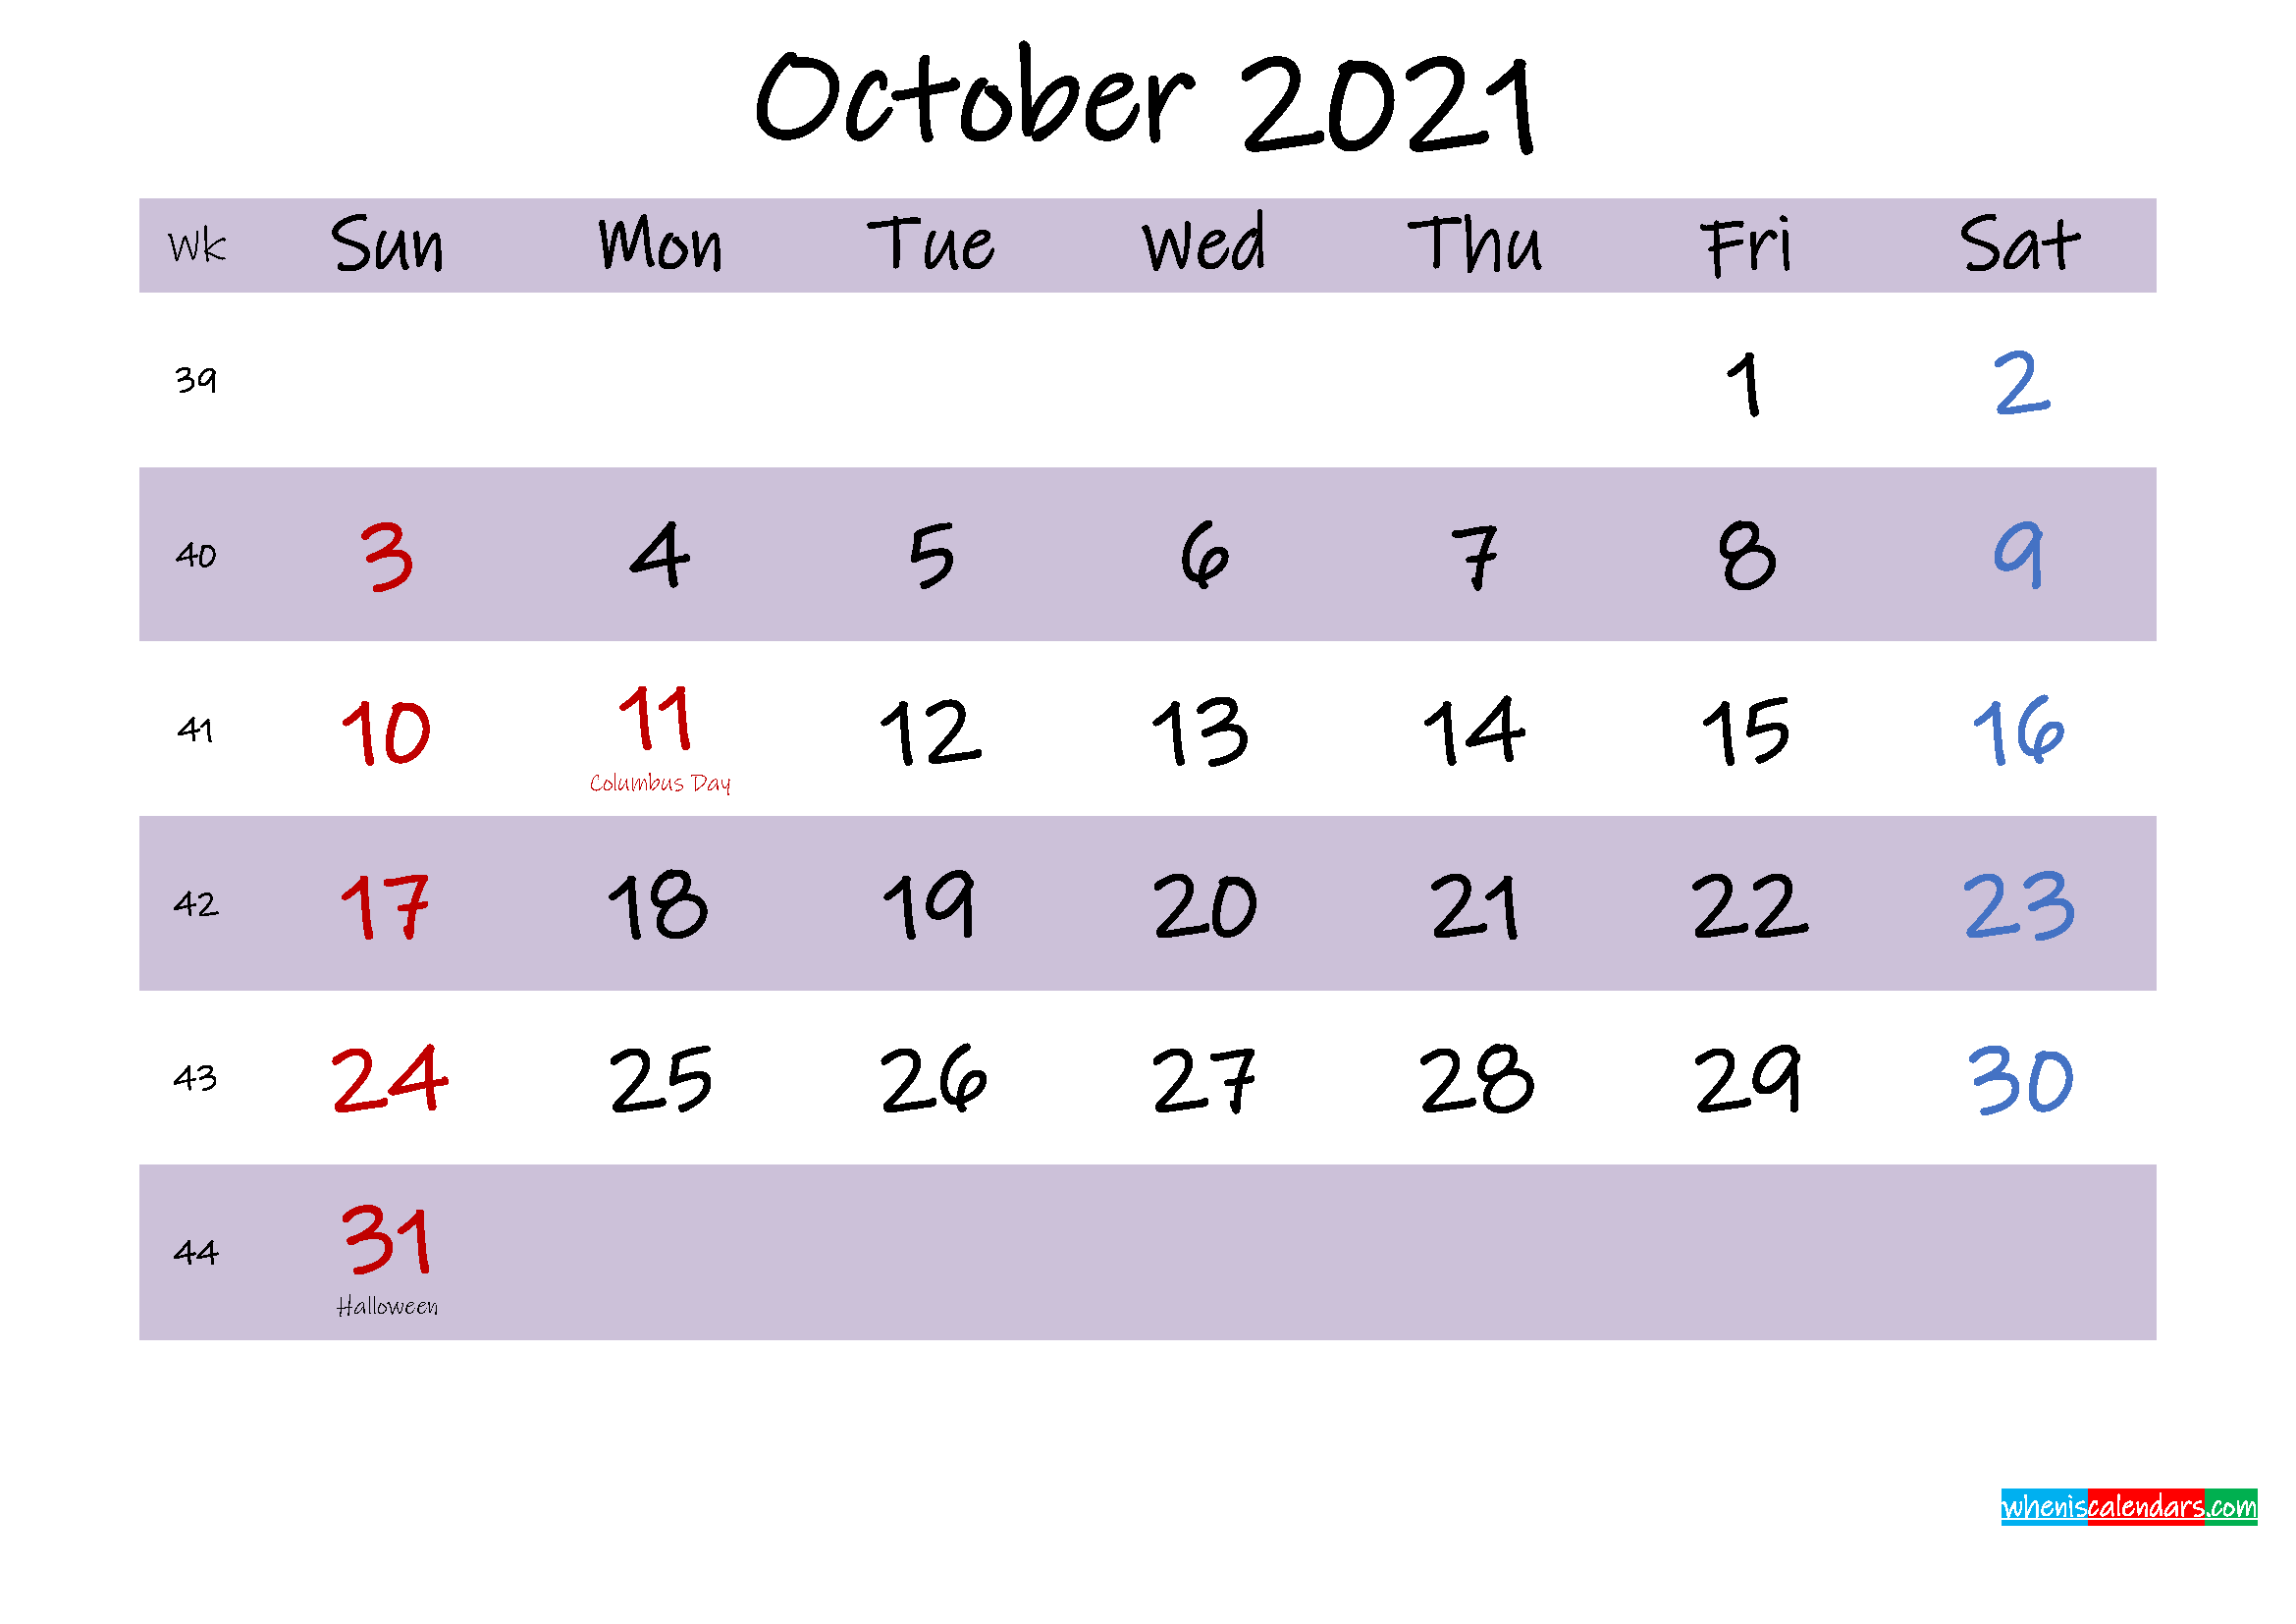 October 2021 Calendar with Holidays Printable - Template ...